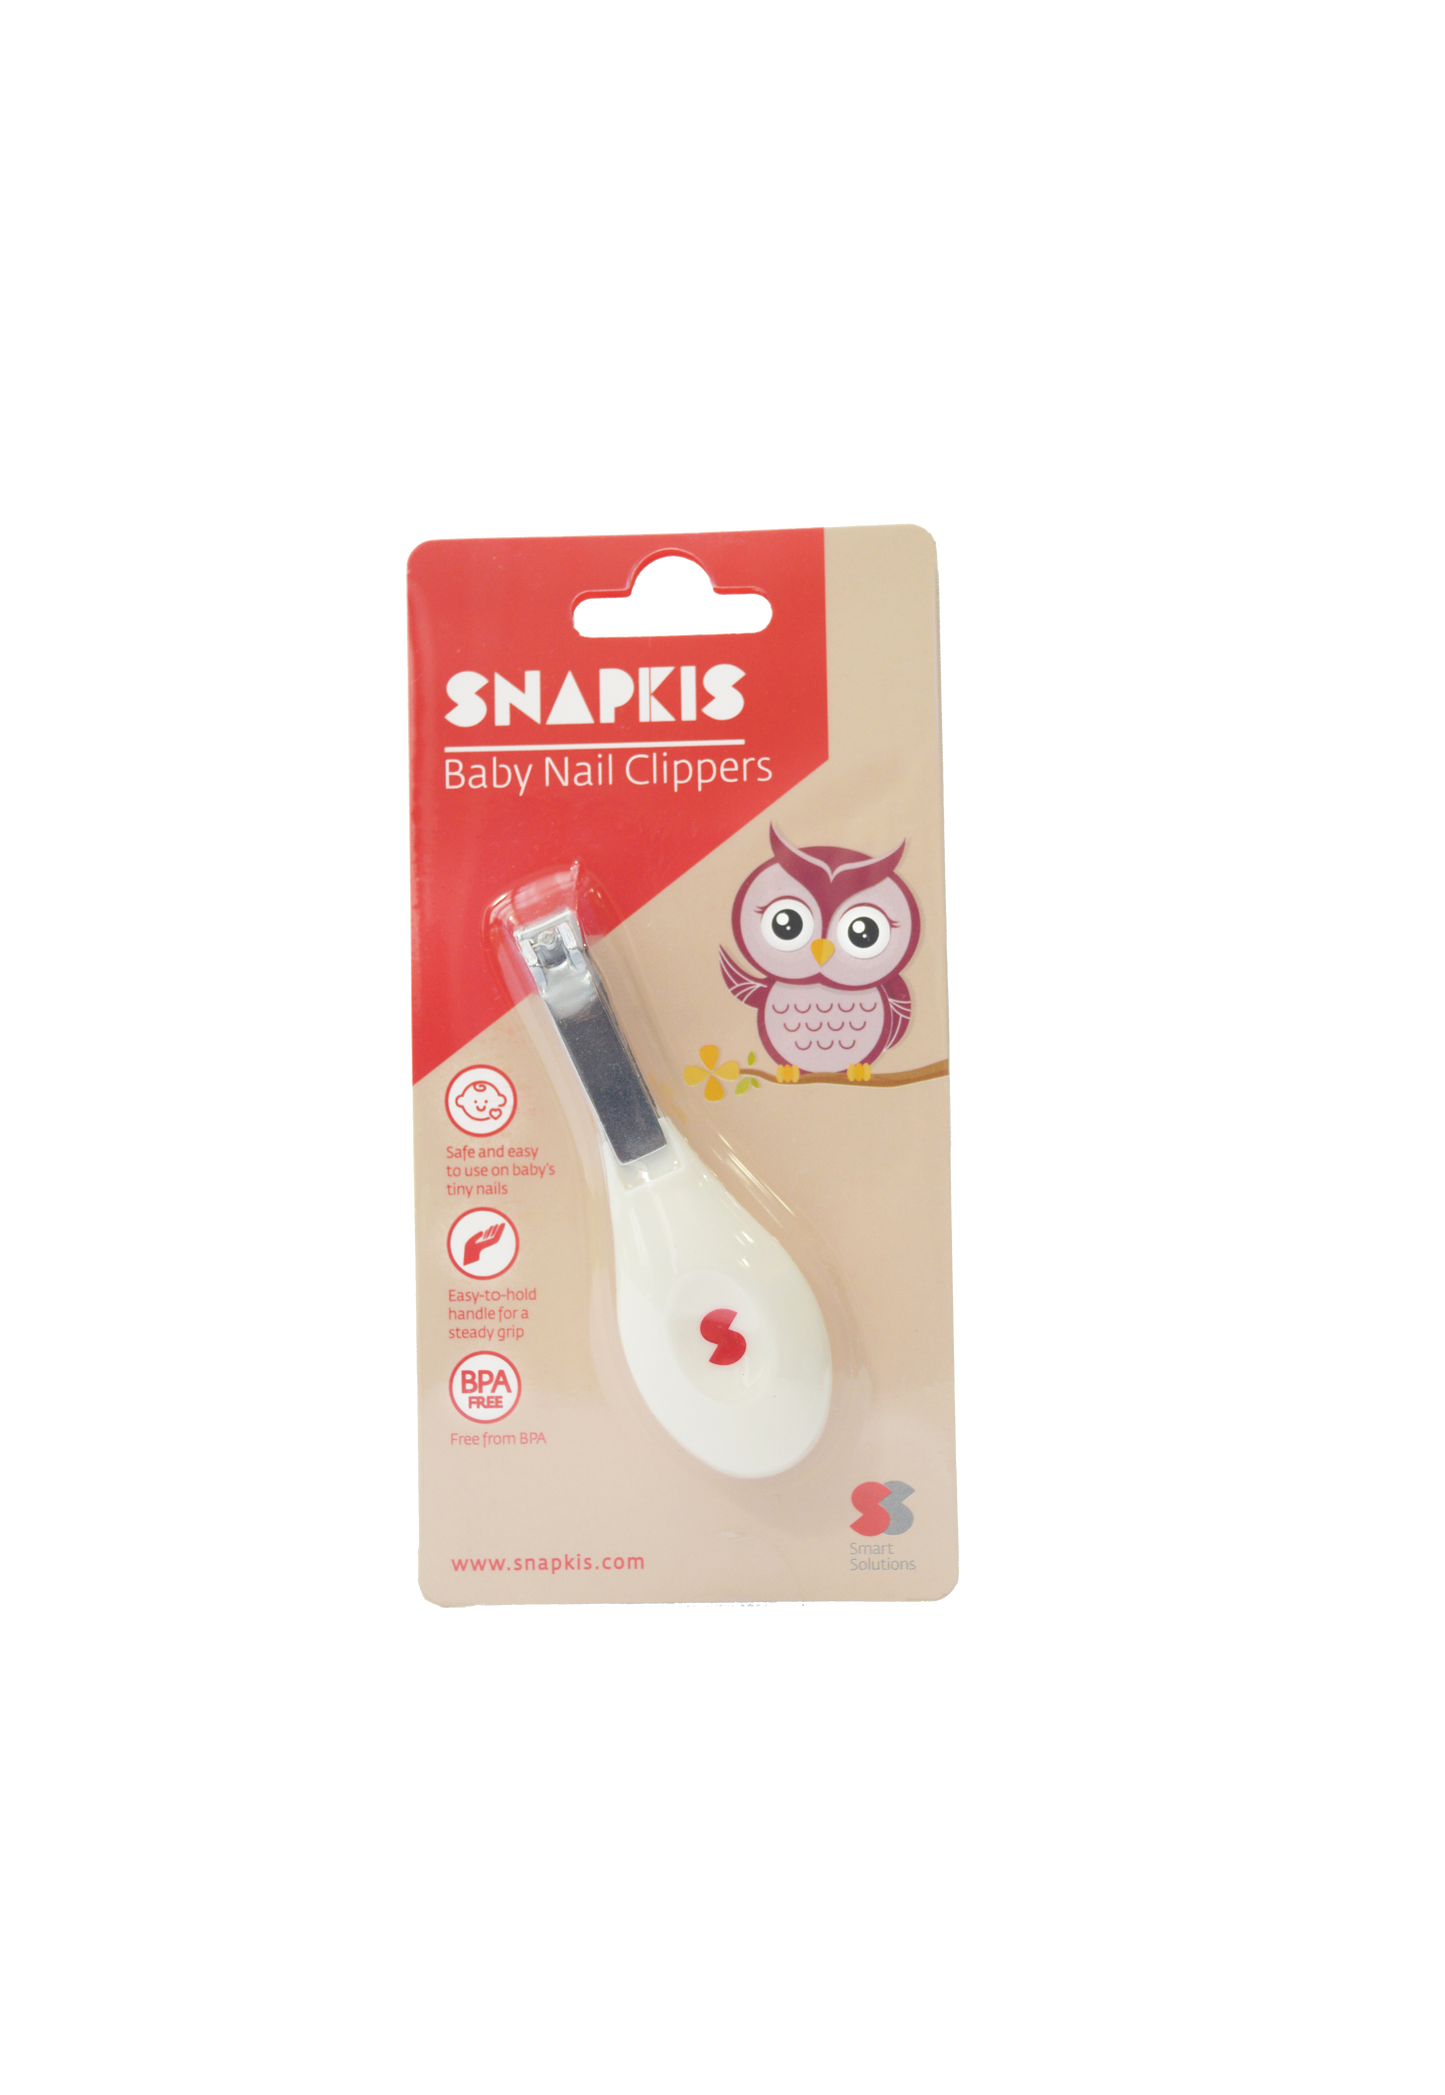 Snapkis Baby Nail Clippers